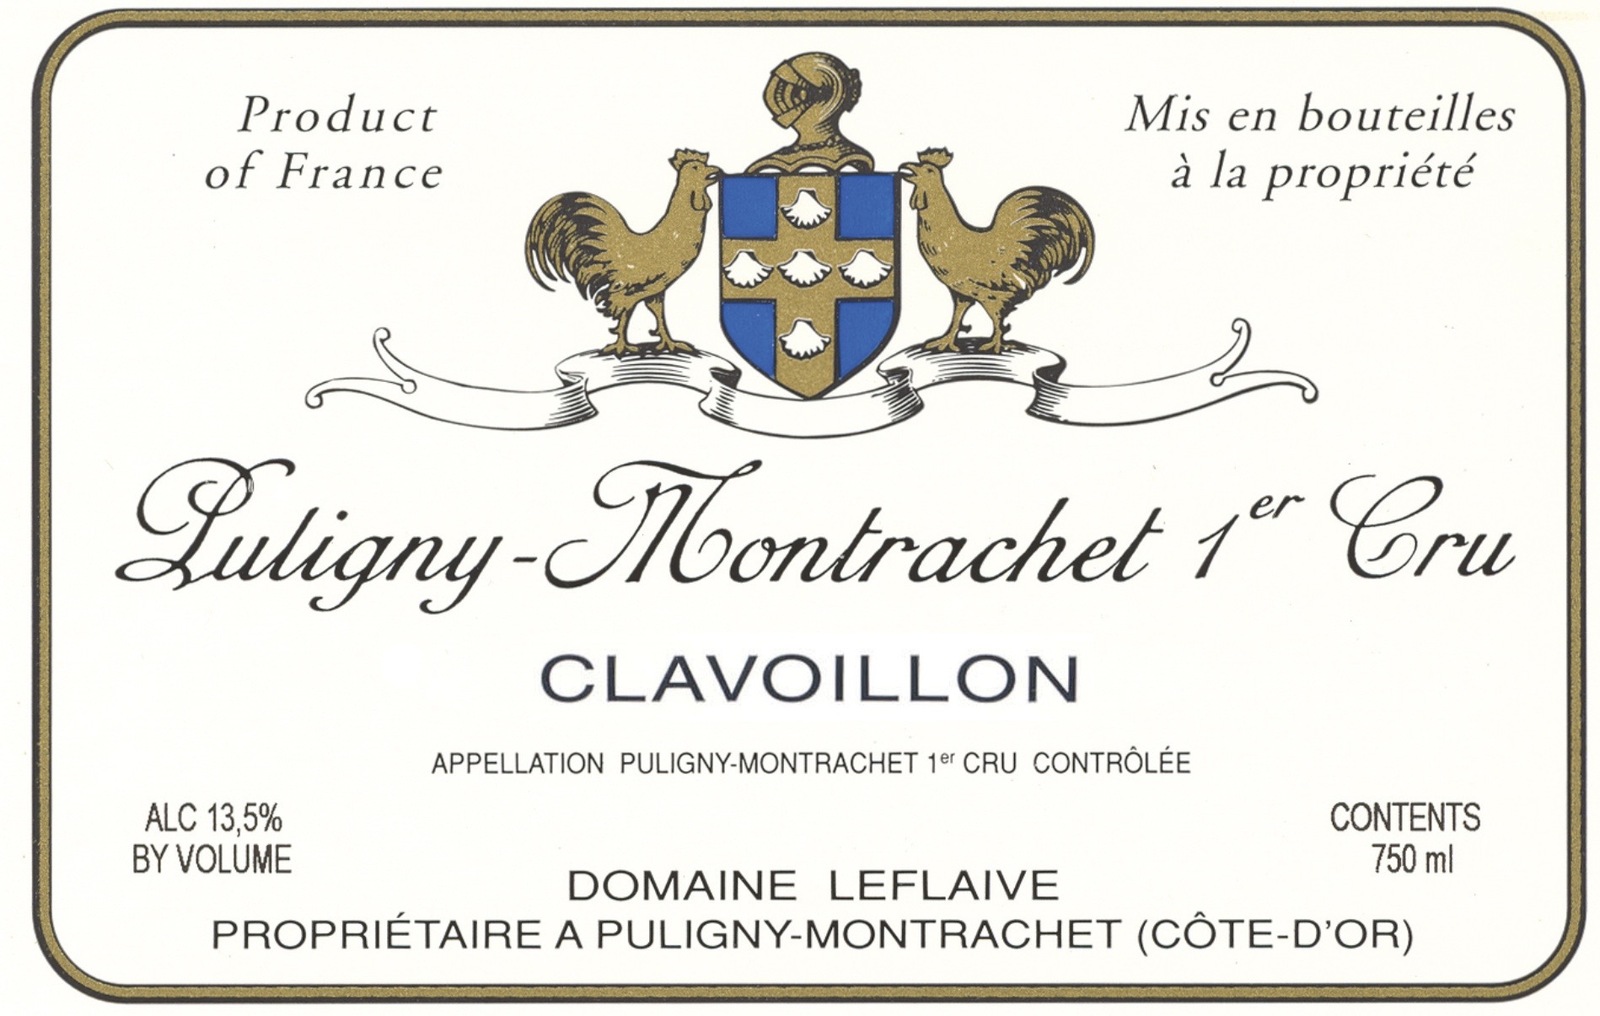 Puligny-Montrachet Clavoillon Leflaive 2008 x 6   ピュリニー　モンラッシェ　クラヴォワイヨン　ルフレーヴ　2008 x 6<br><br>